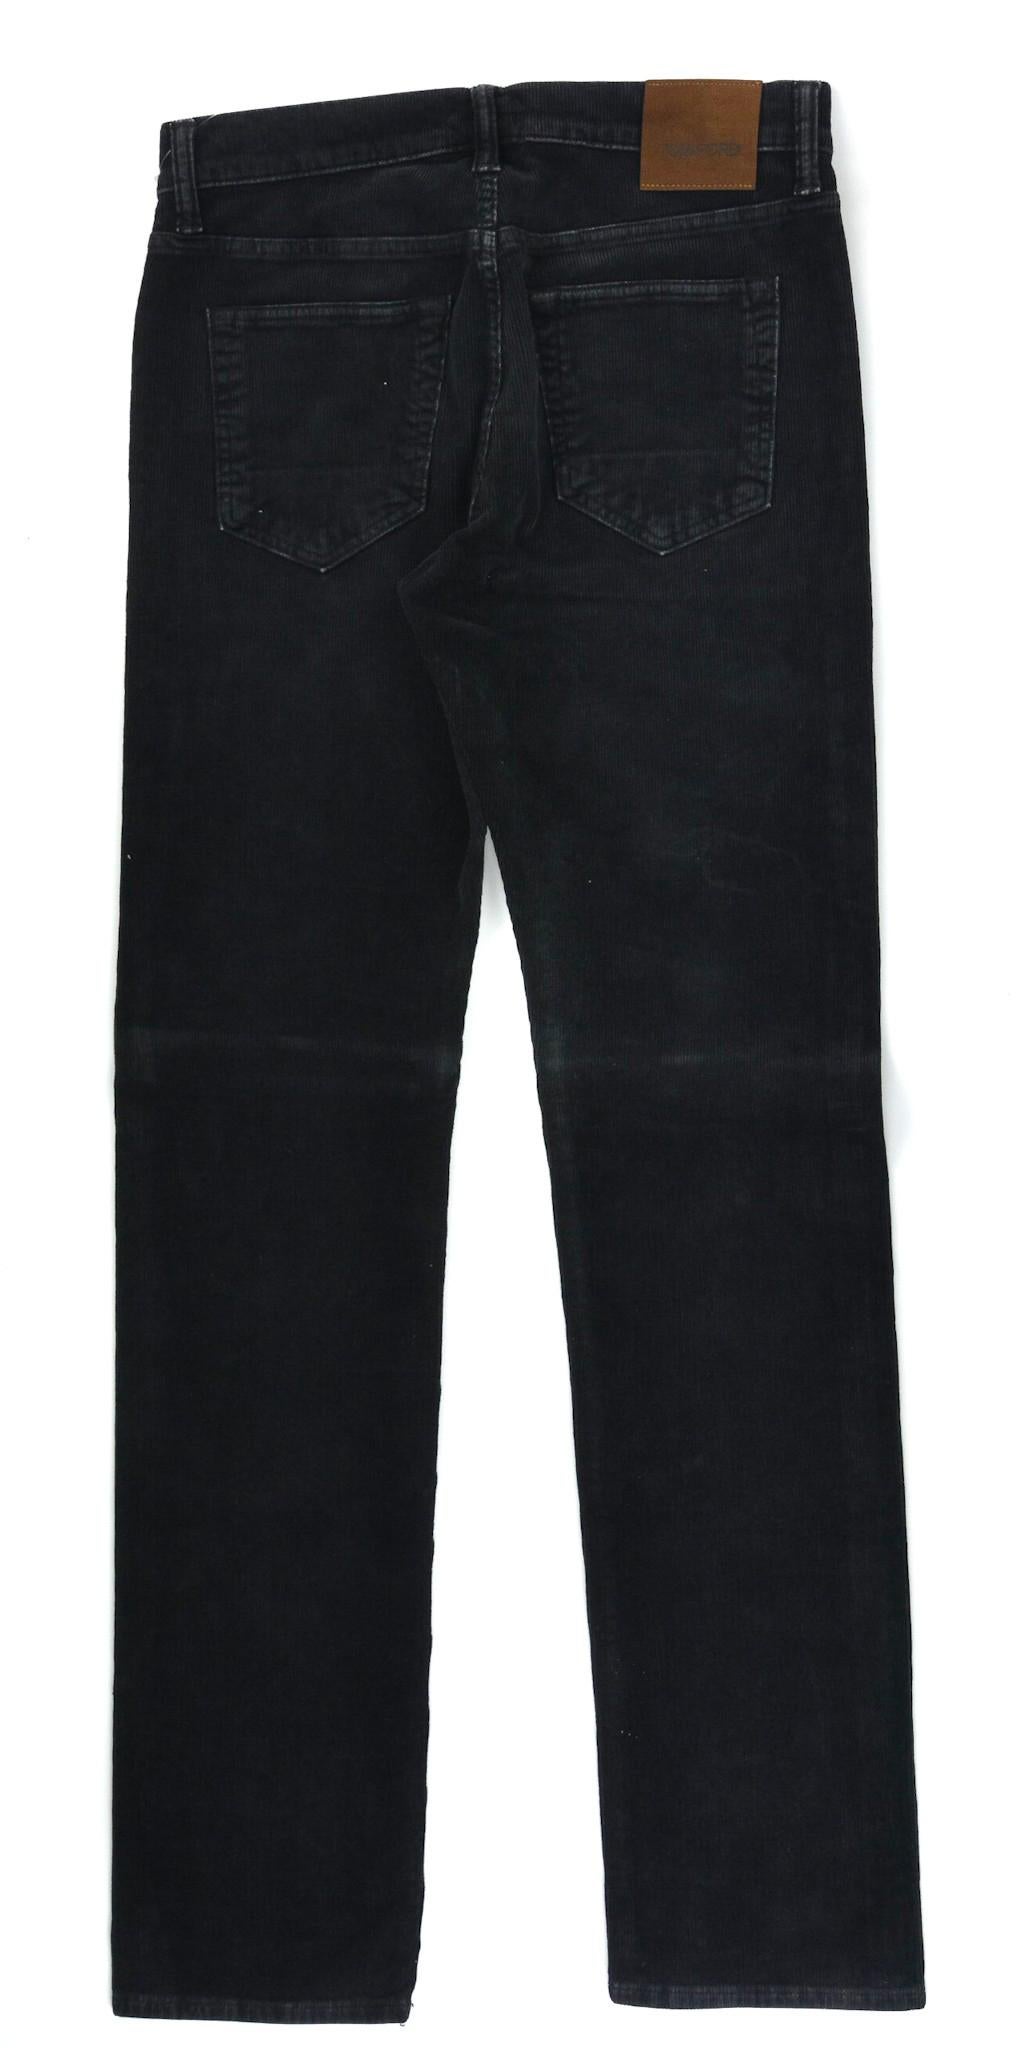 Display your effortless refinement with your Tom Ford straight fit pants. These pants feature dark grey colored corduroy texture, selvedge denim construction, and modern straight leg silhouette. You can pair these trousers with a slim fit t shirt